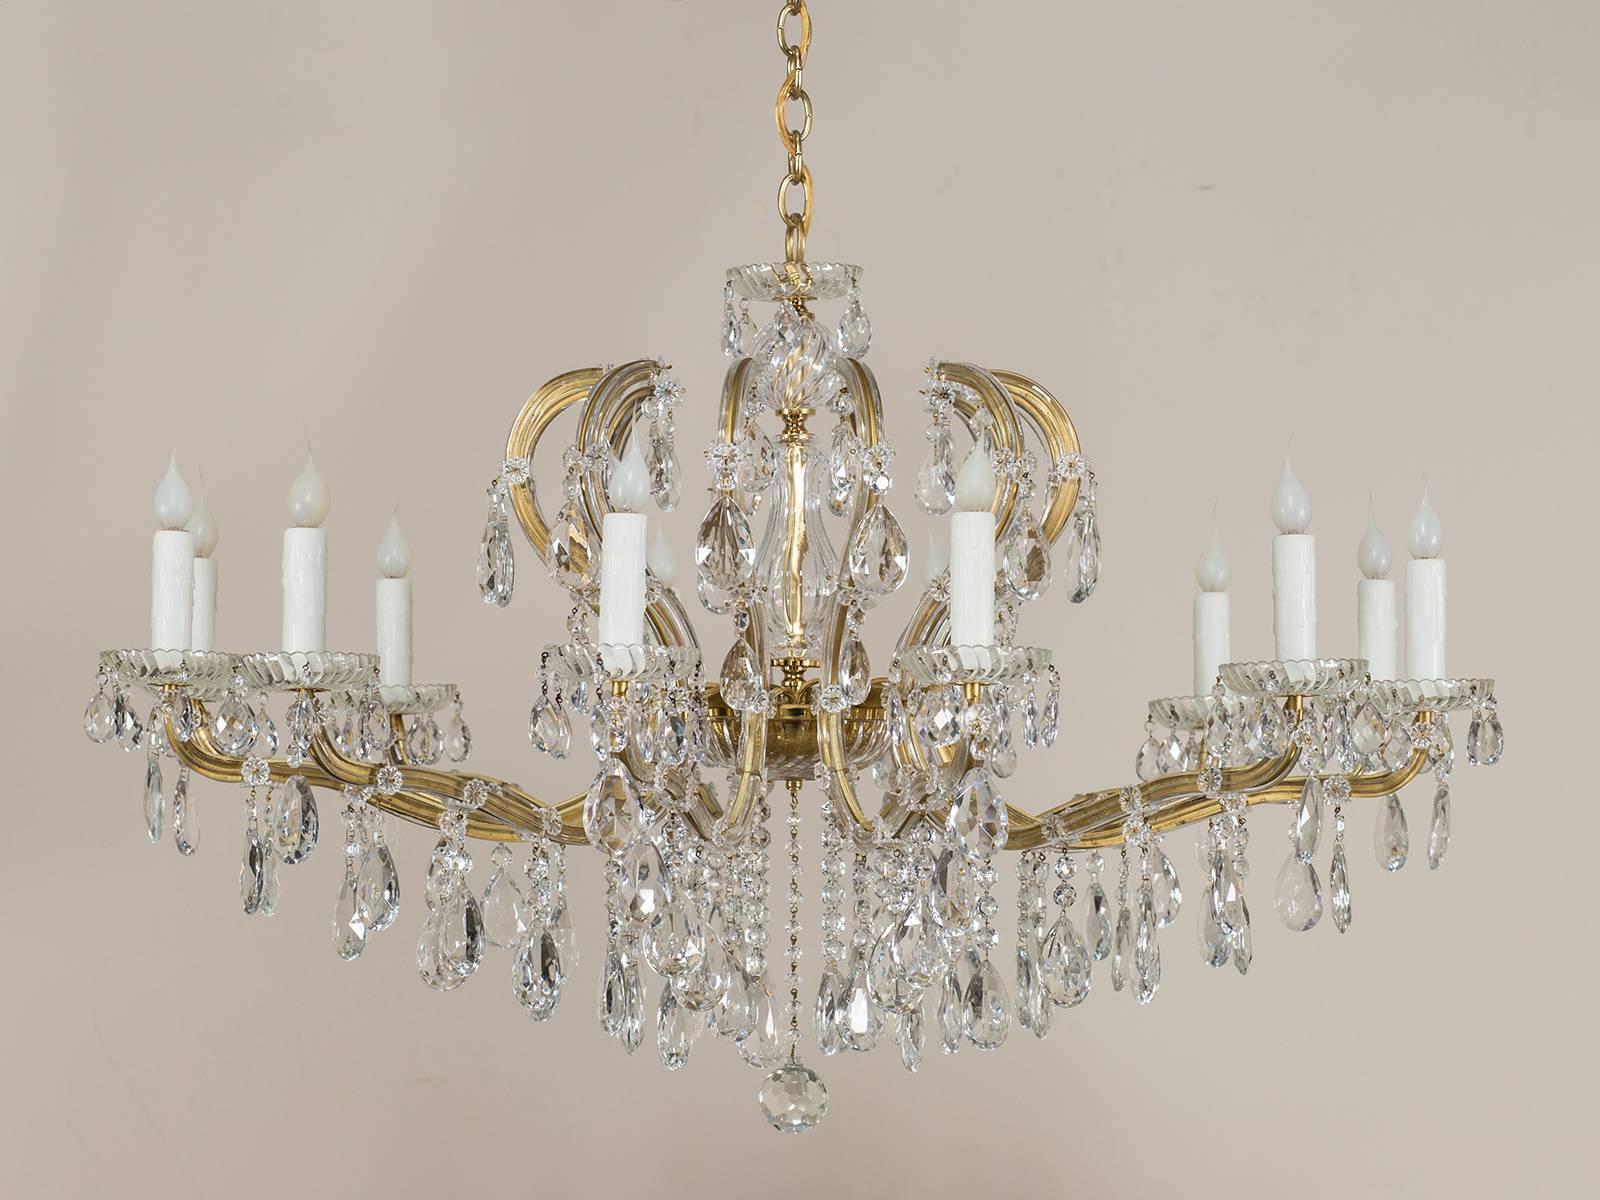 The elegant balance between the width and the height of this vintage crystal chandelier give it an especial appeal as it is perfect for rooms with a cozier feel. This type of chandelier with the metal frame that is enclosed with crystal and adorned